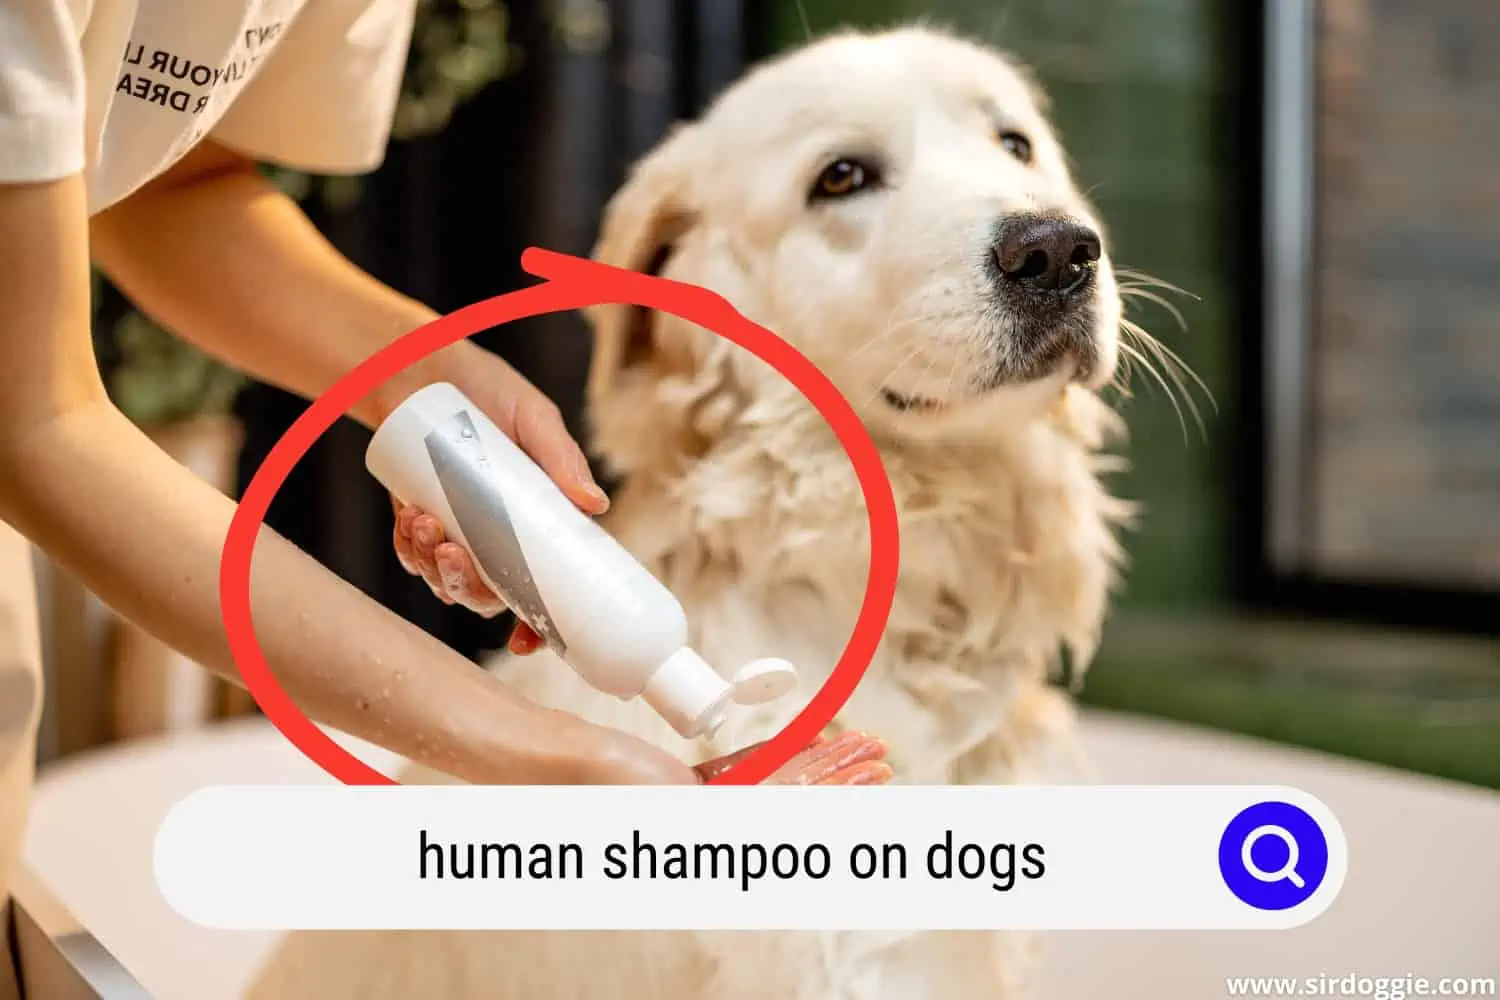 Pet owner holding a shampoo to use on dog for bathing